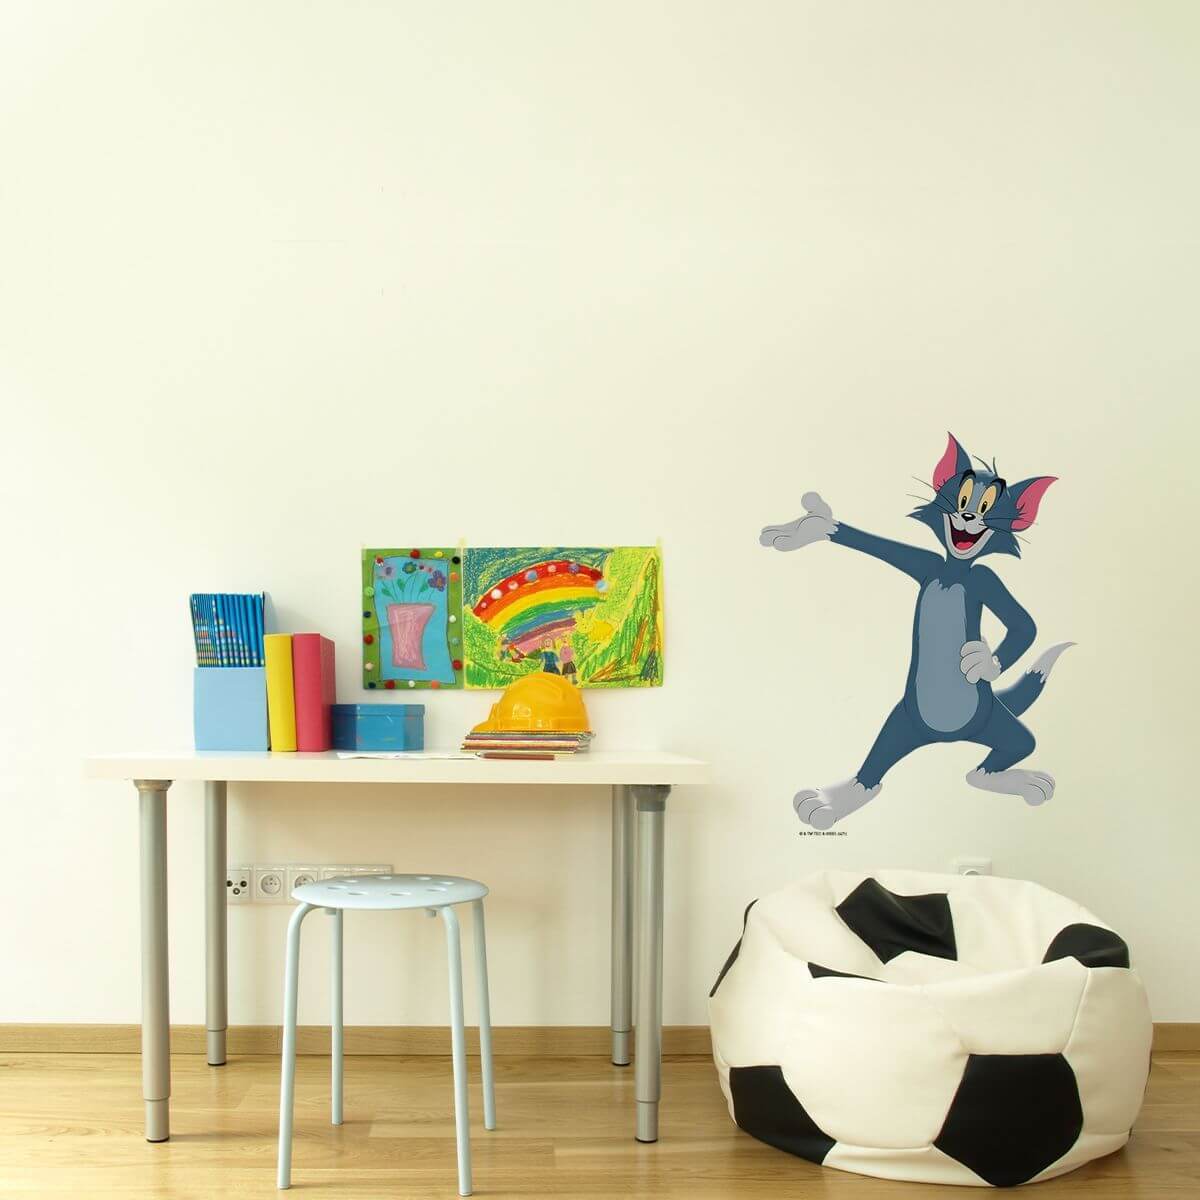 Kismet Decals Tom & Jerry: Happy Tom Welcomes You Licensed Wall Sticker - Easy DIY Home & Room Decor Cartoon Wall Art - Kismet Decals